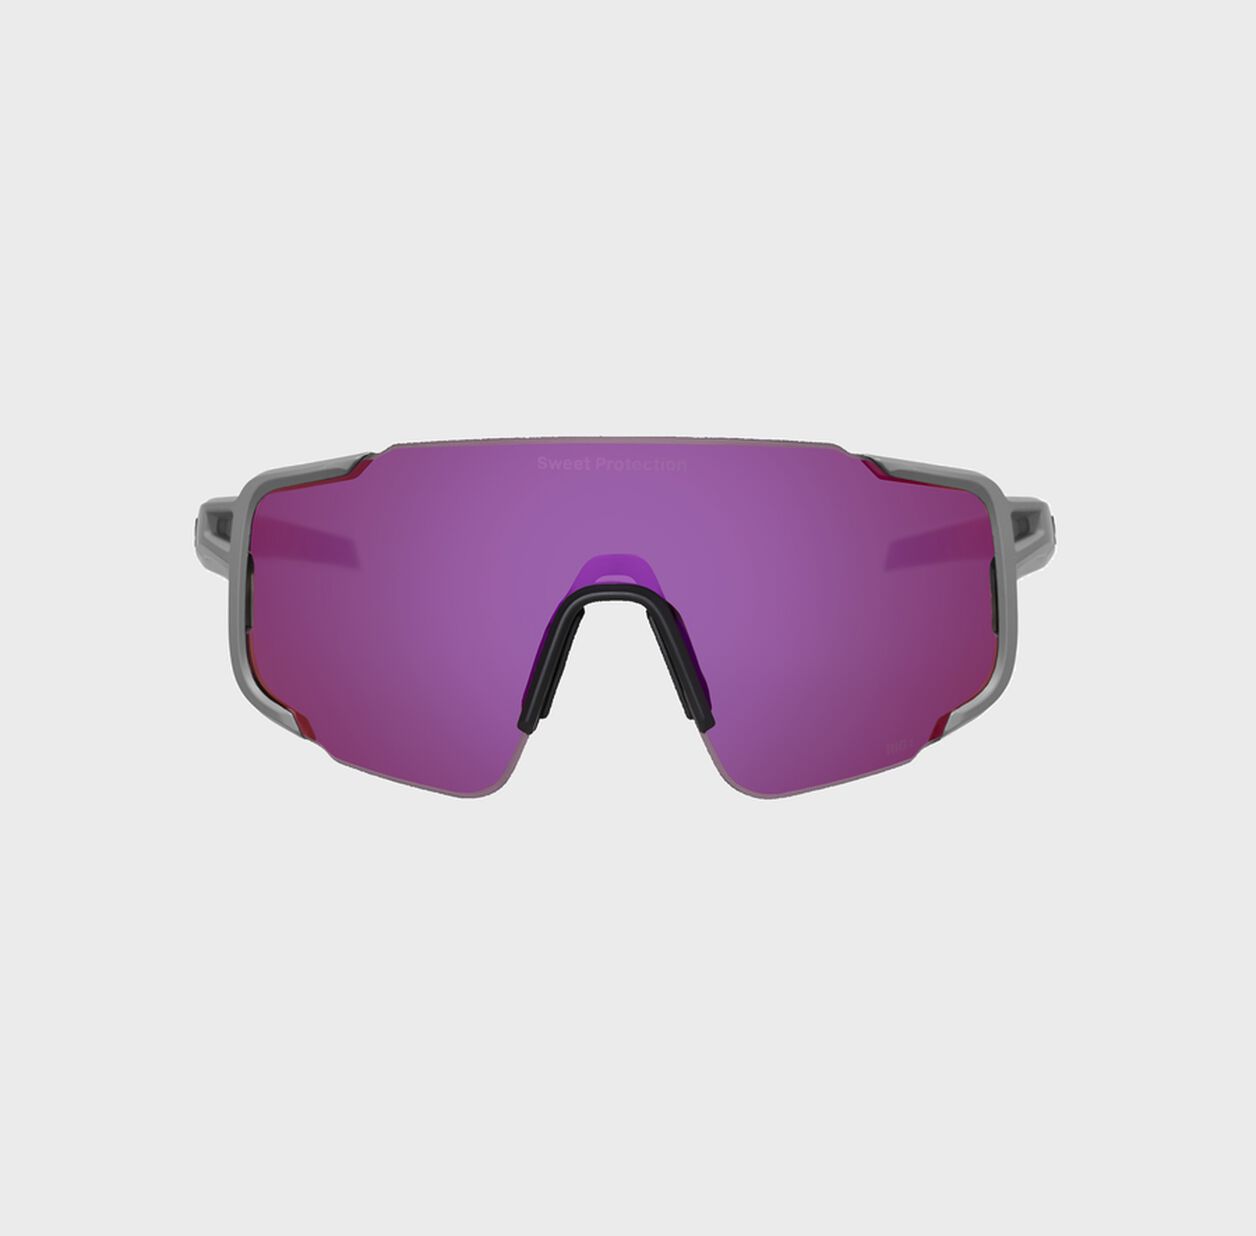 Sweet Protection - Lunettes Ronin Max RIG Reflect Nardo Gray Lunettes Sweet Protection 